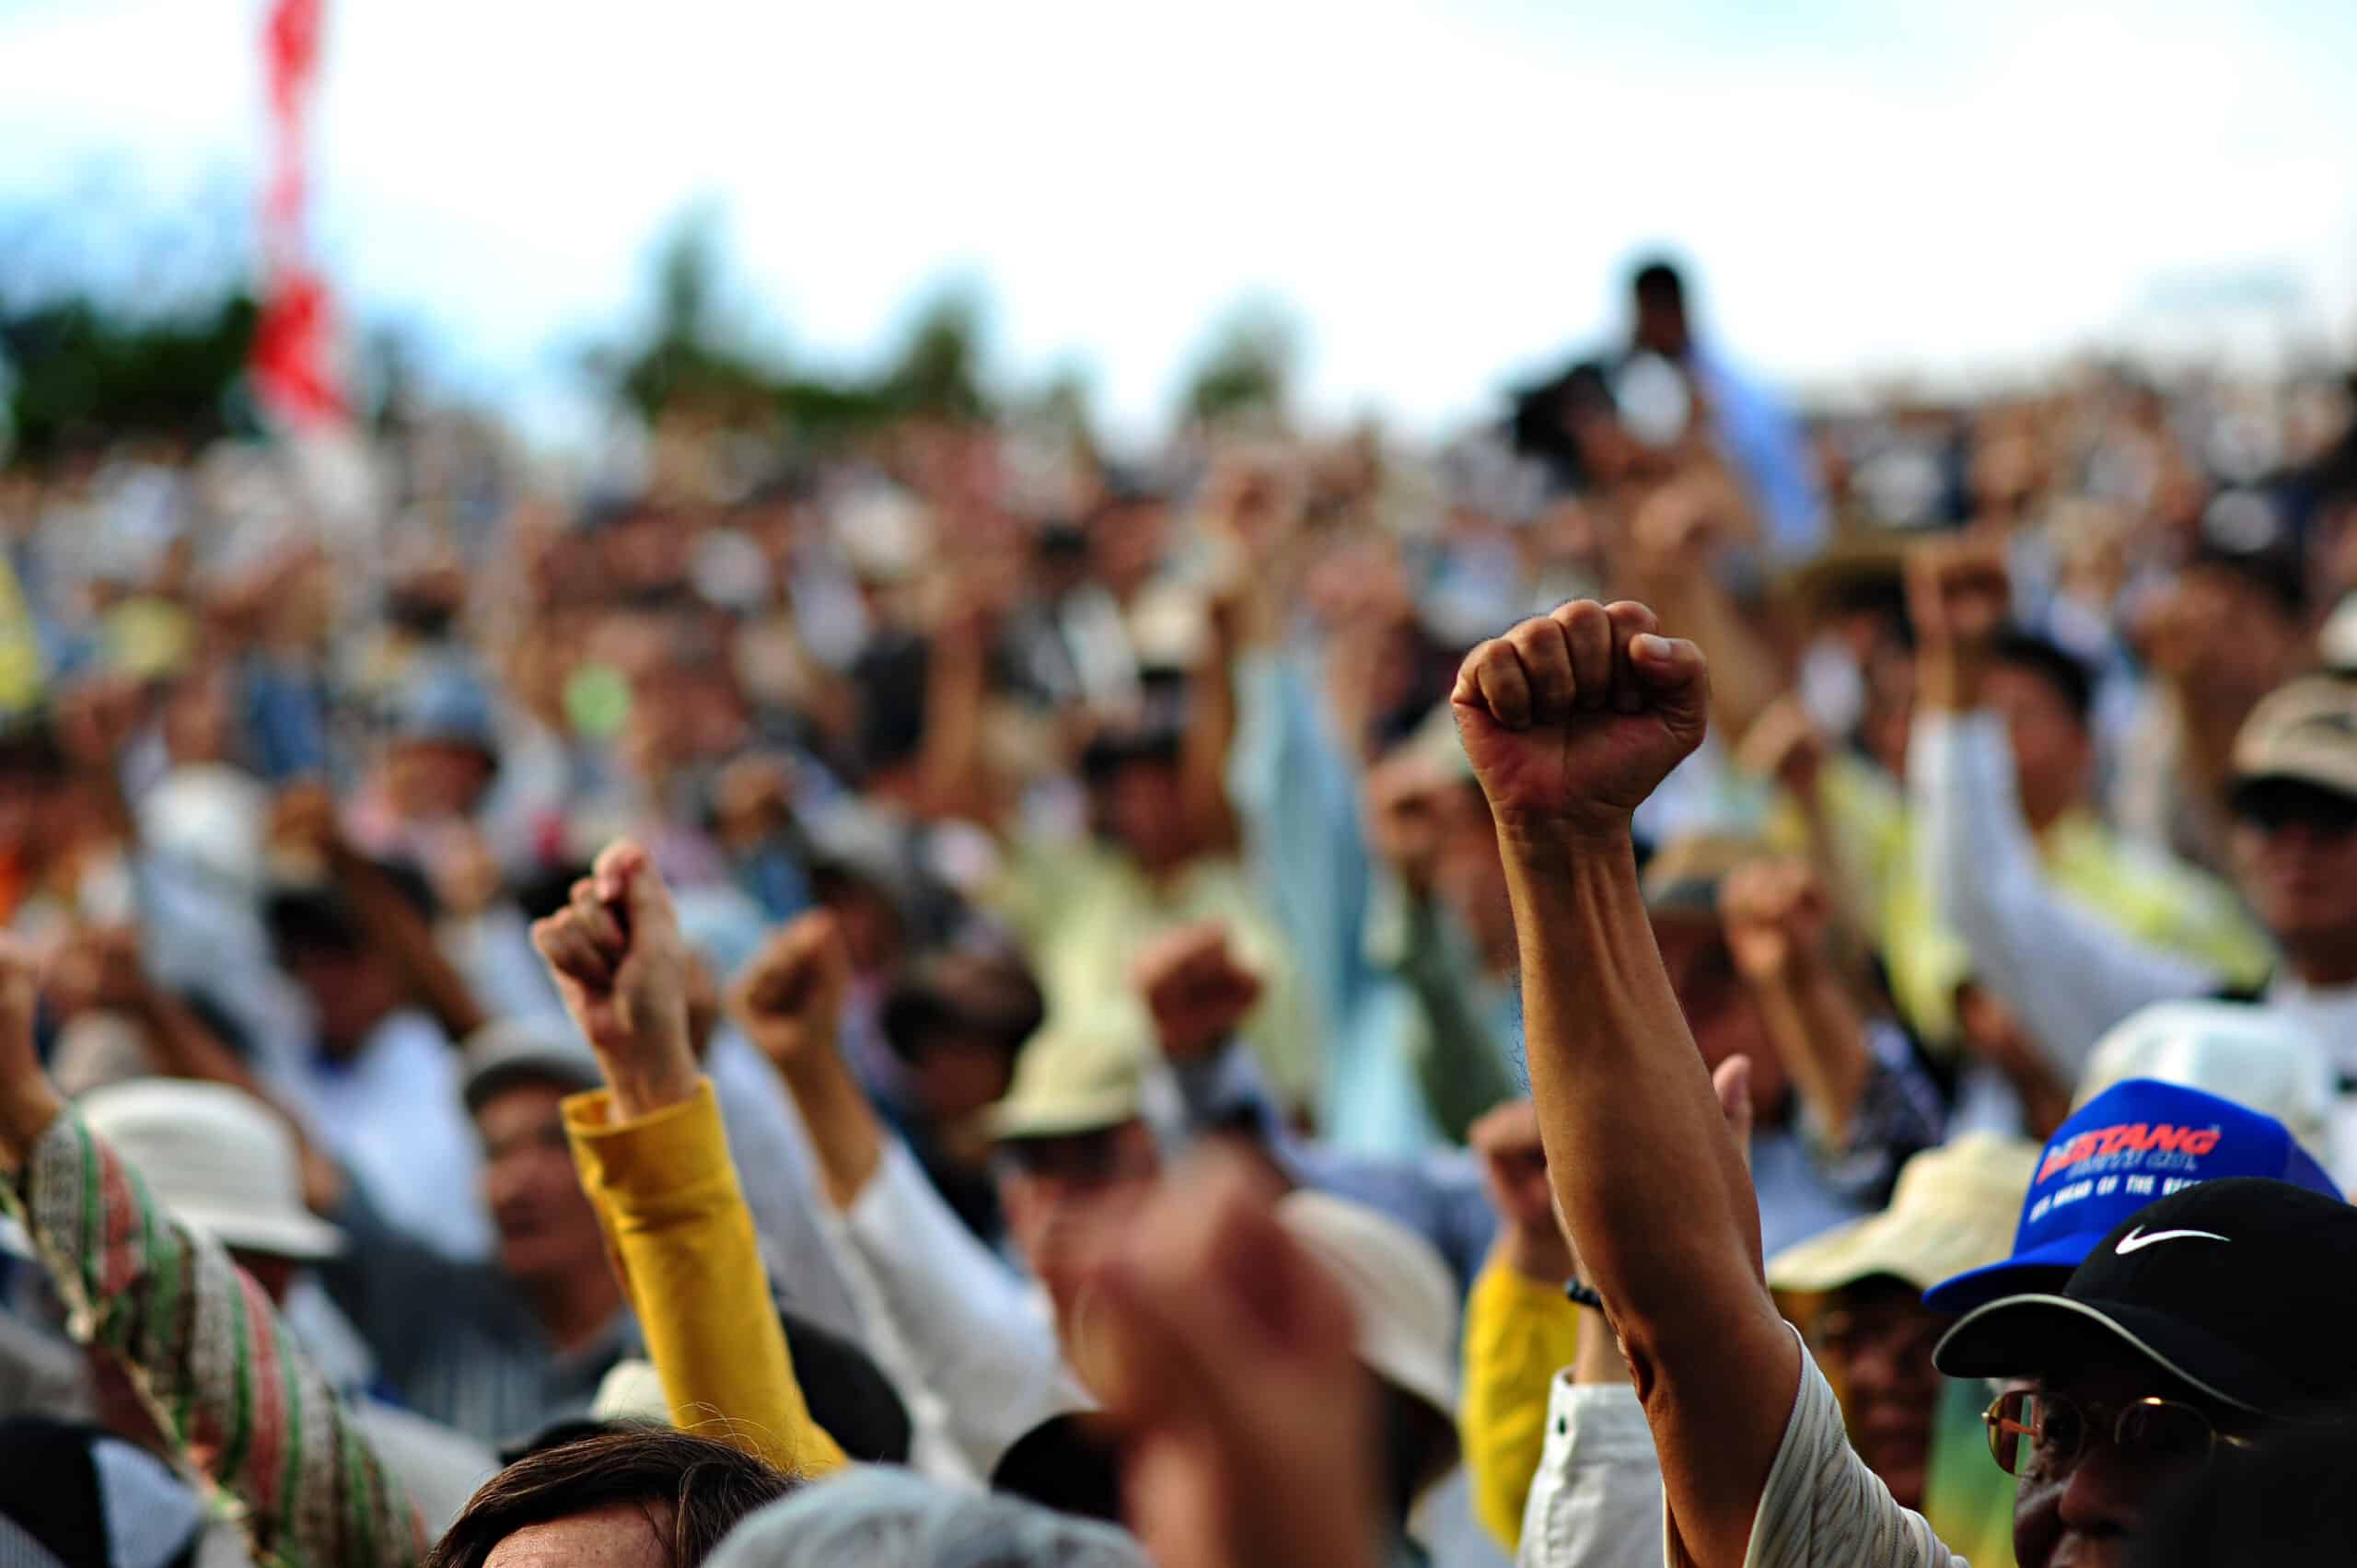 A picture of raised fists at a protest. (Credit: commons.wikipedia.org)